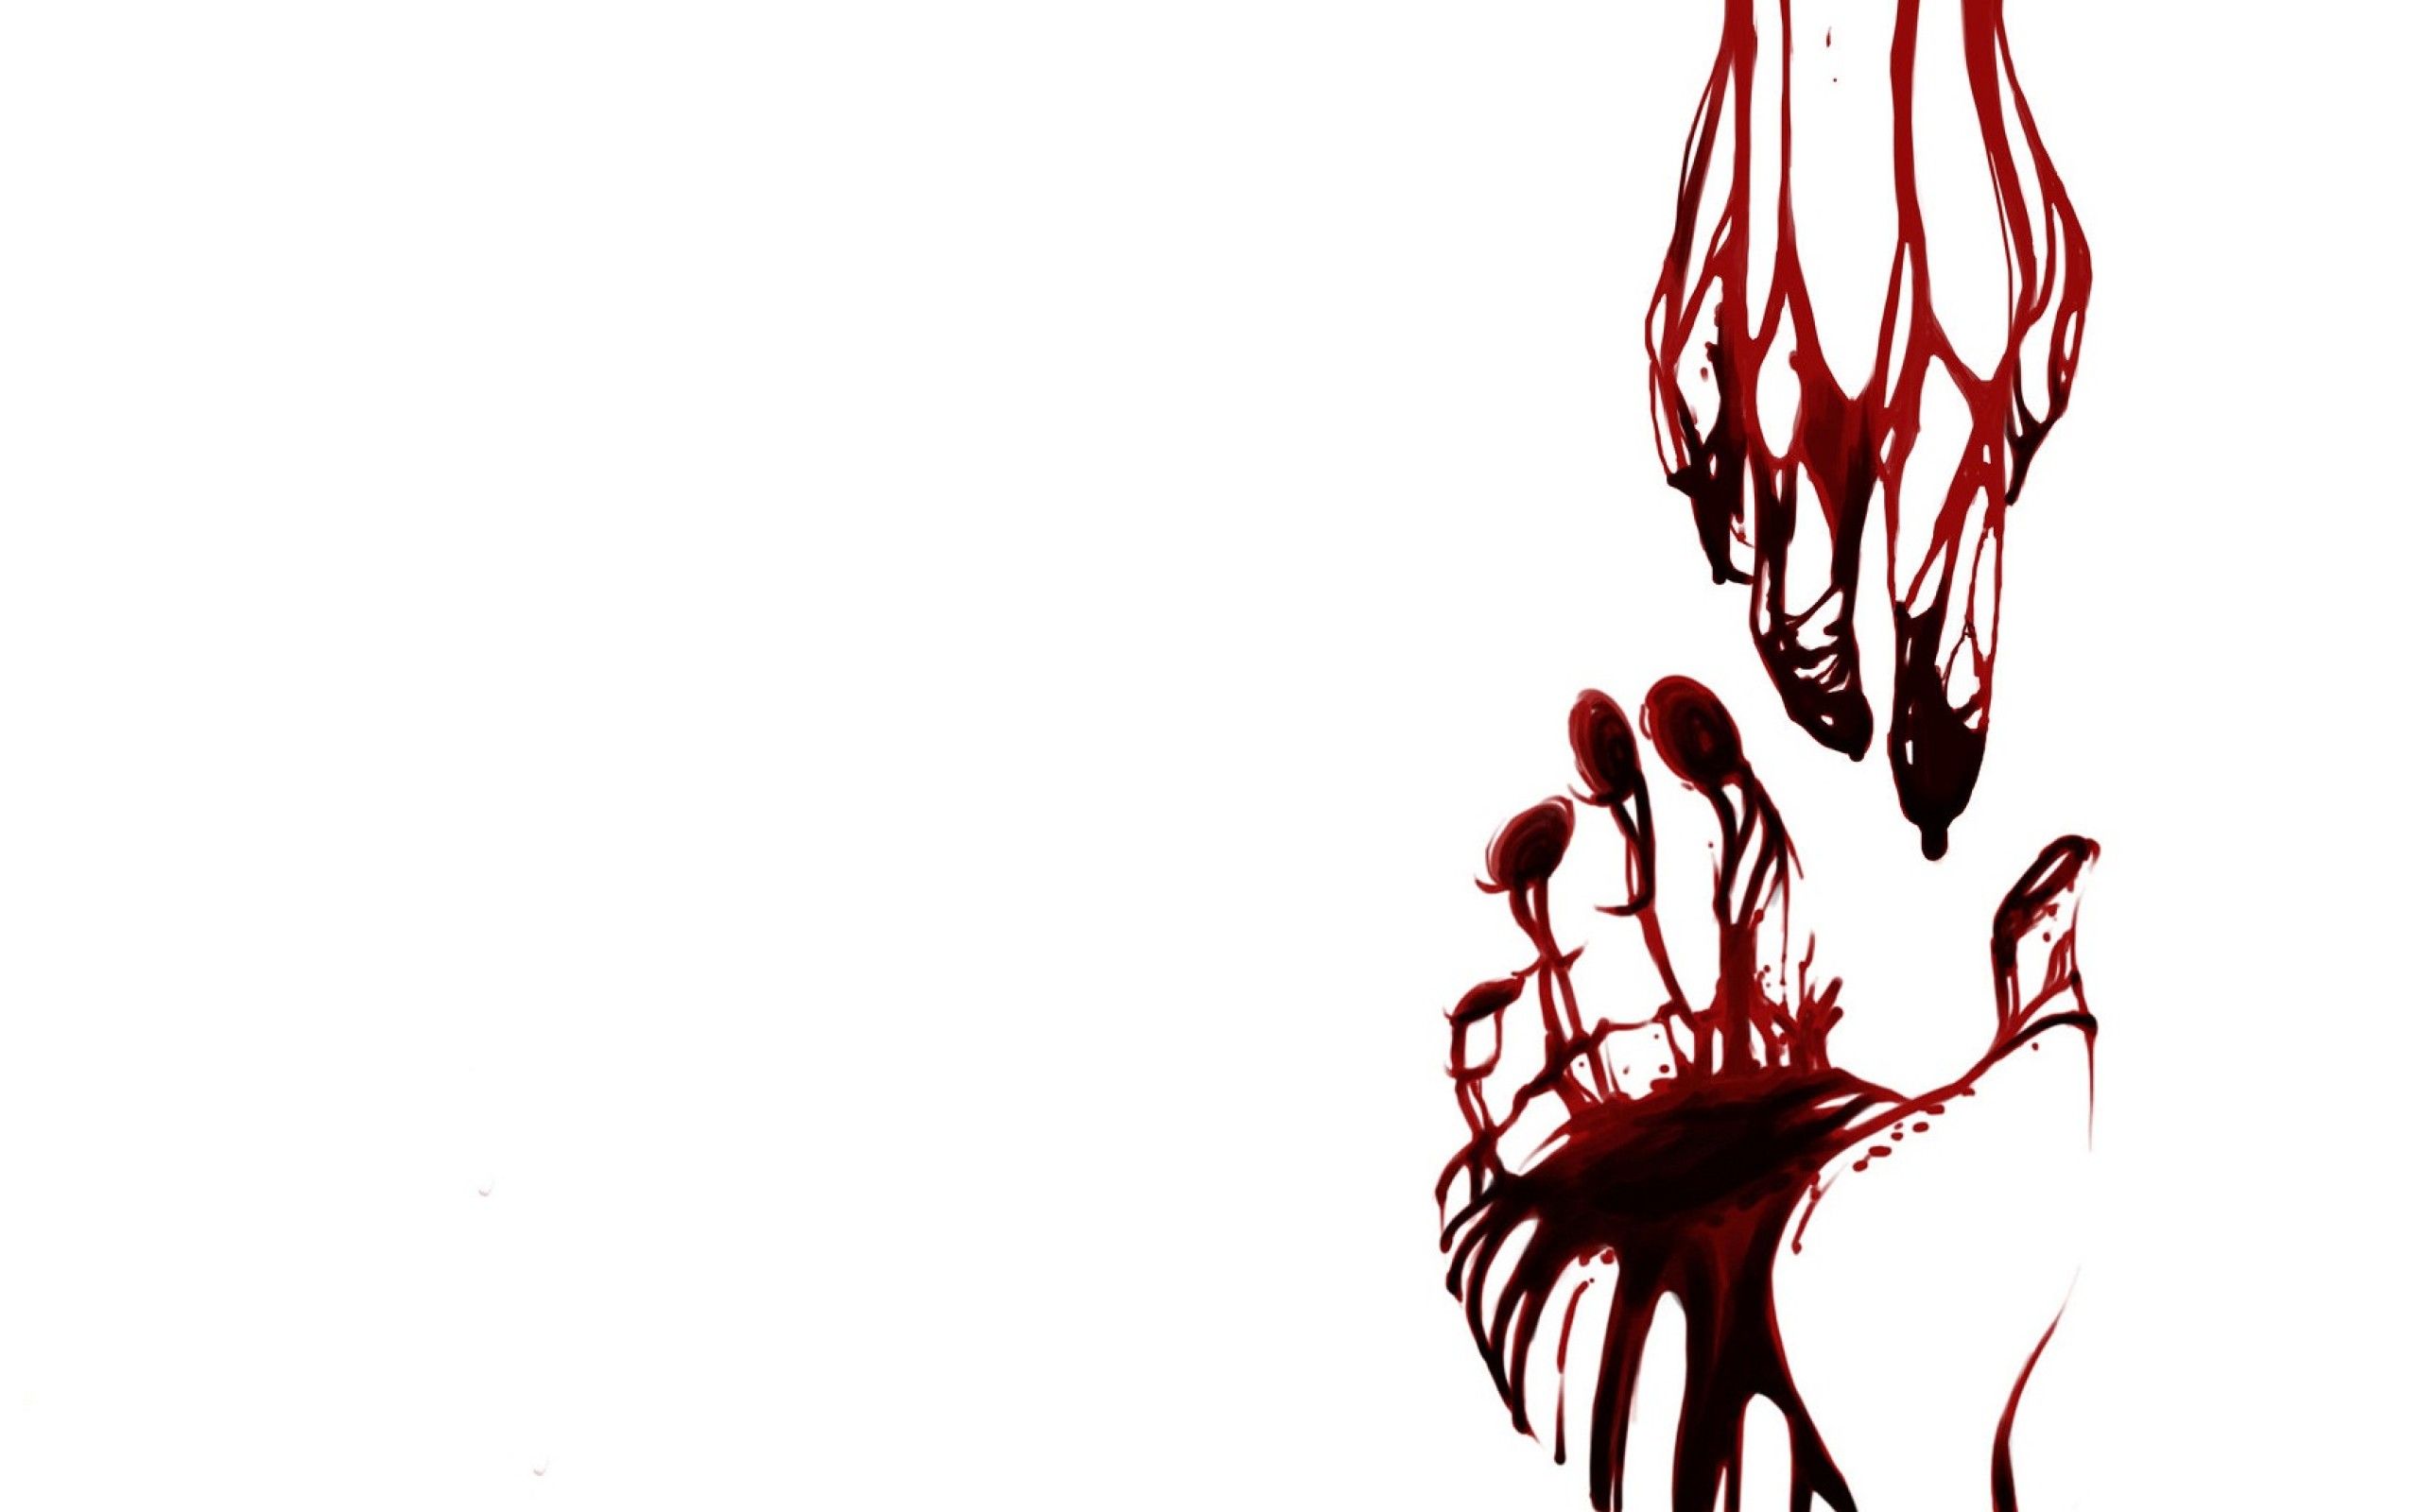 A hand with blood coming out of it - Chromebook, blood